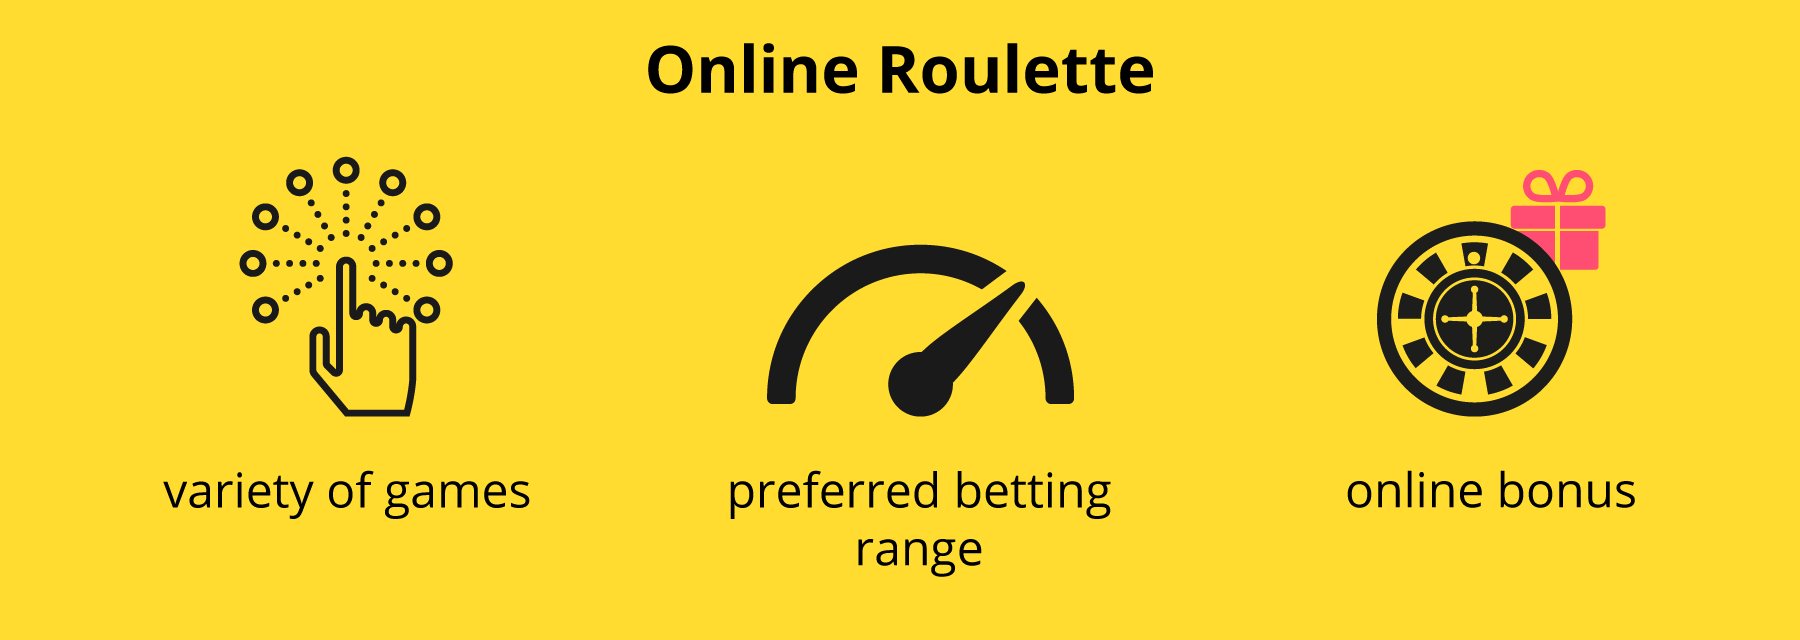 Online Roulette for UAE players  - Emirates Casino Roulette Guide UAE Casino - UAE Online Roulette 